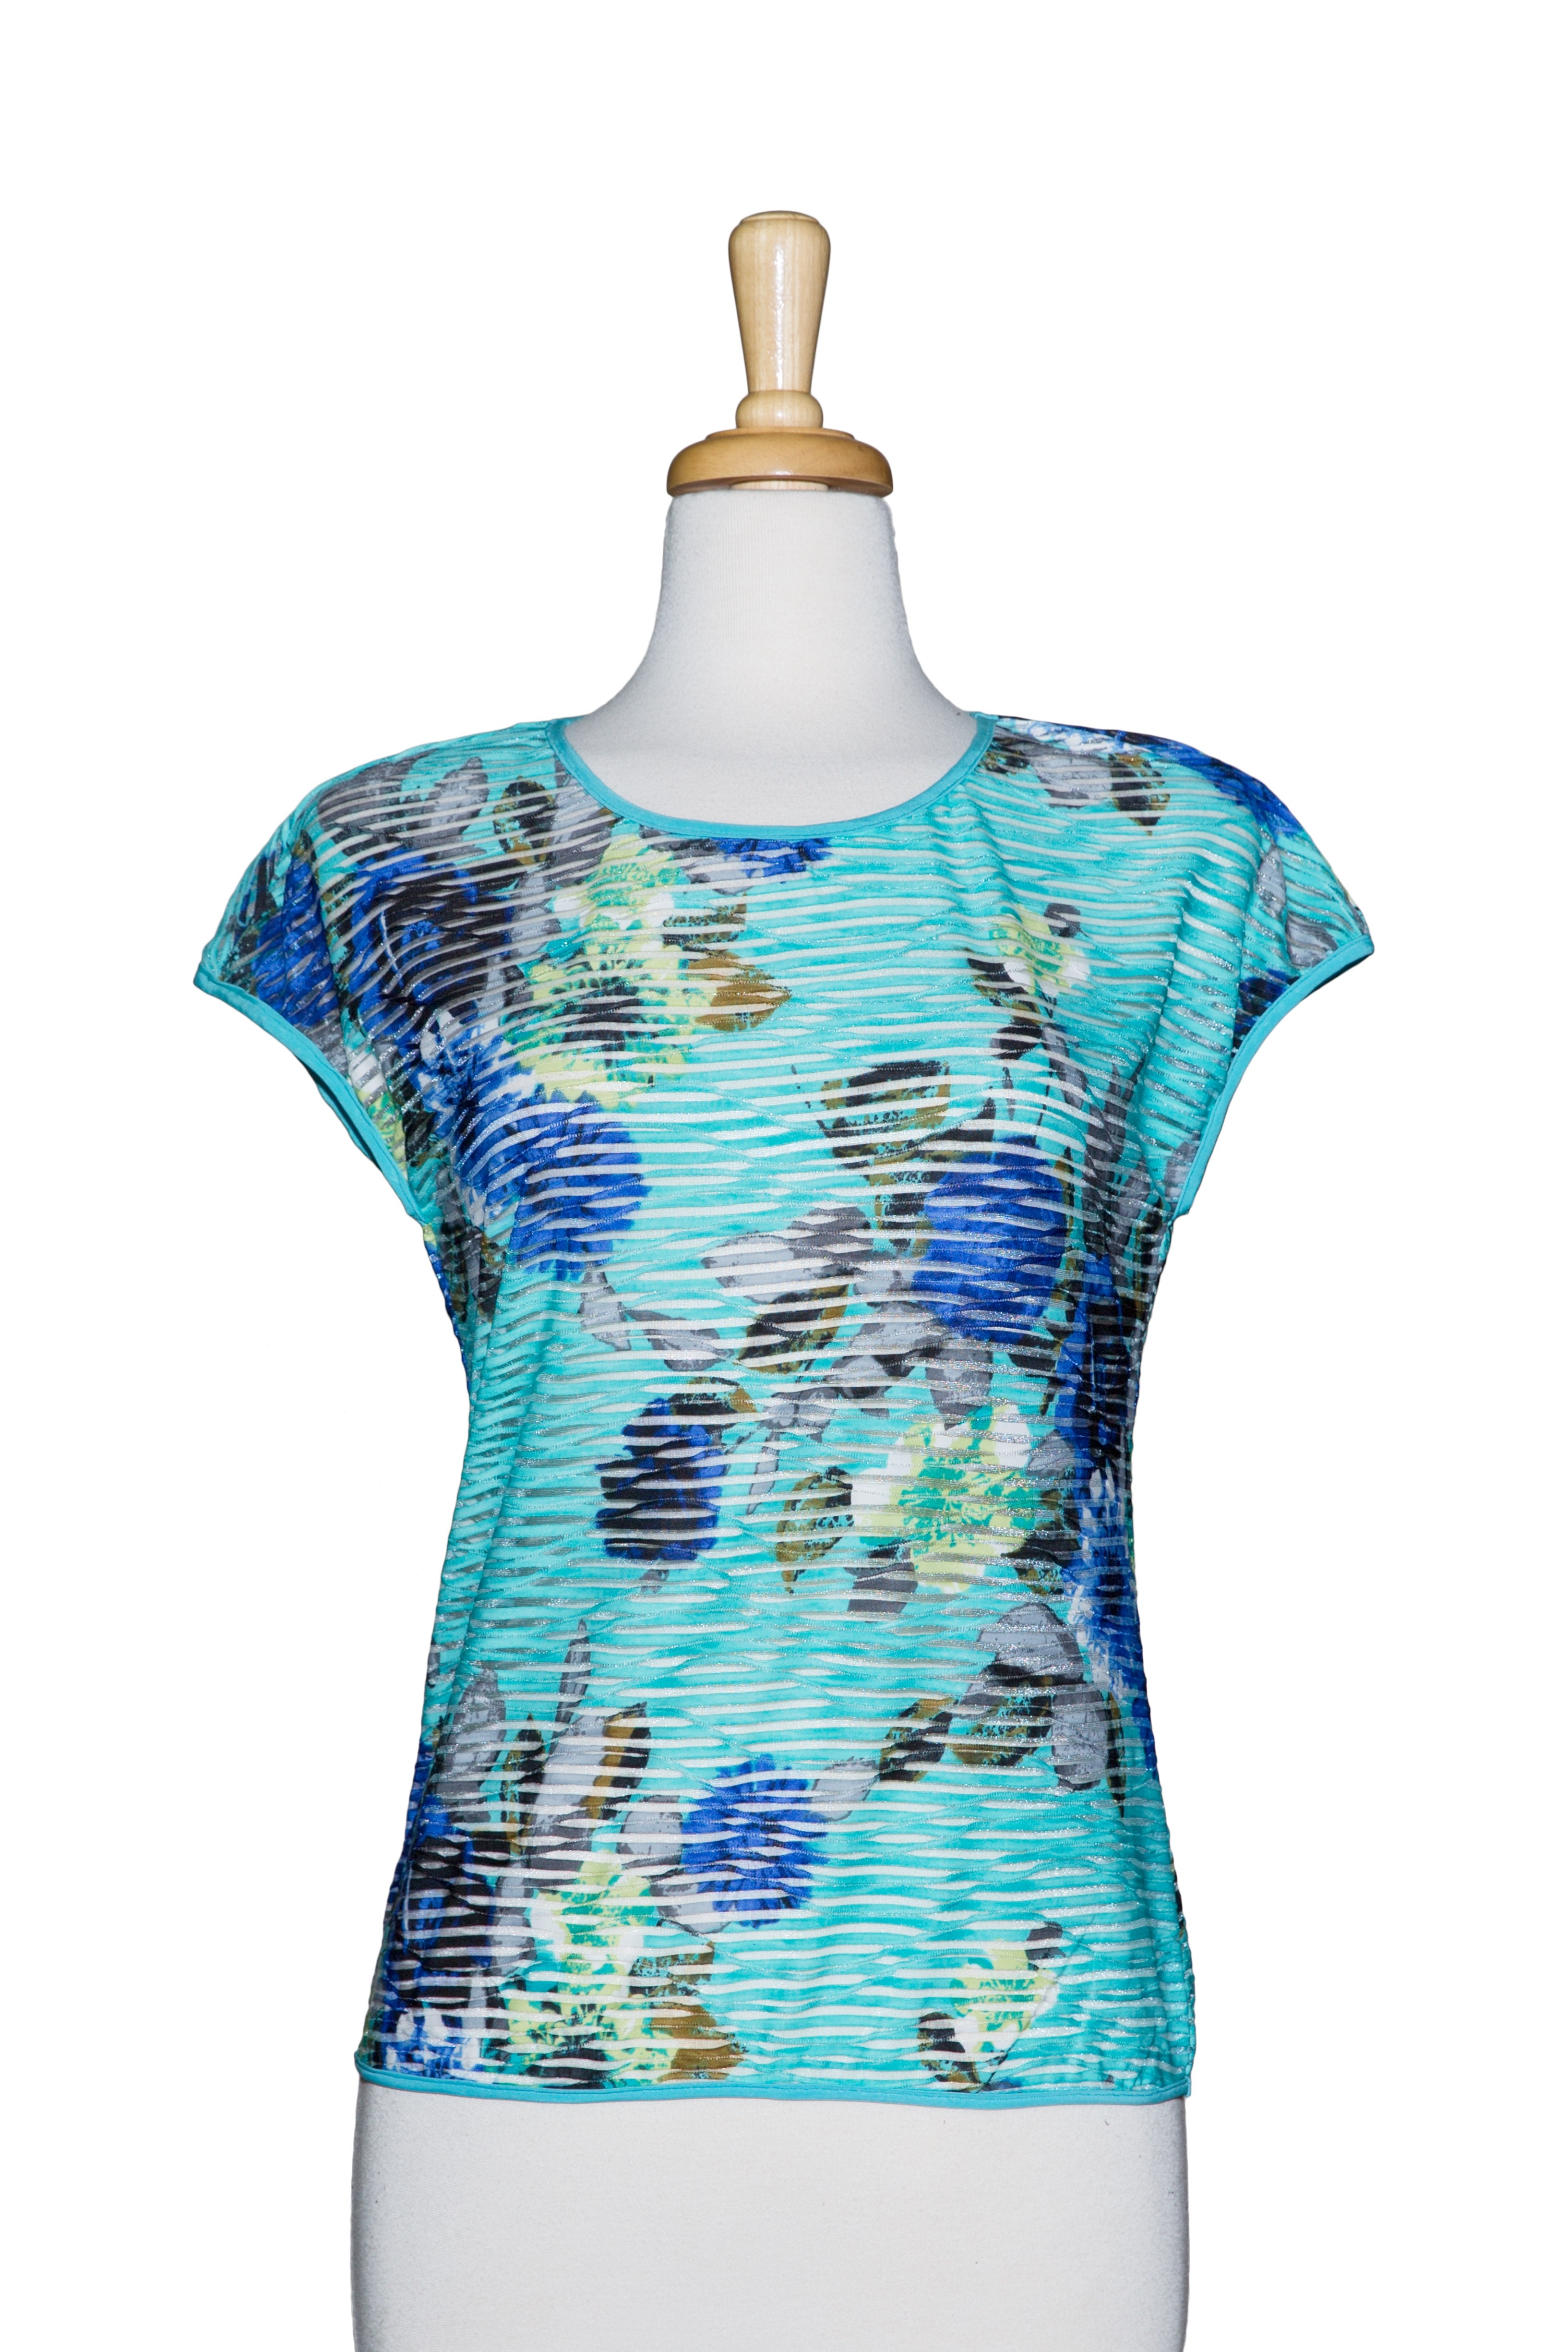 Turquoise Waves  Floral  Short Sleeve Top